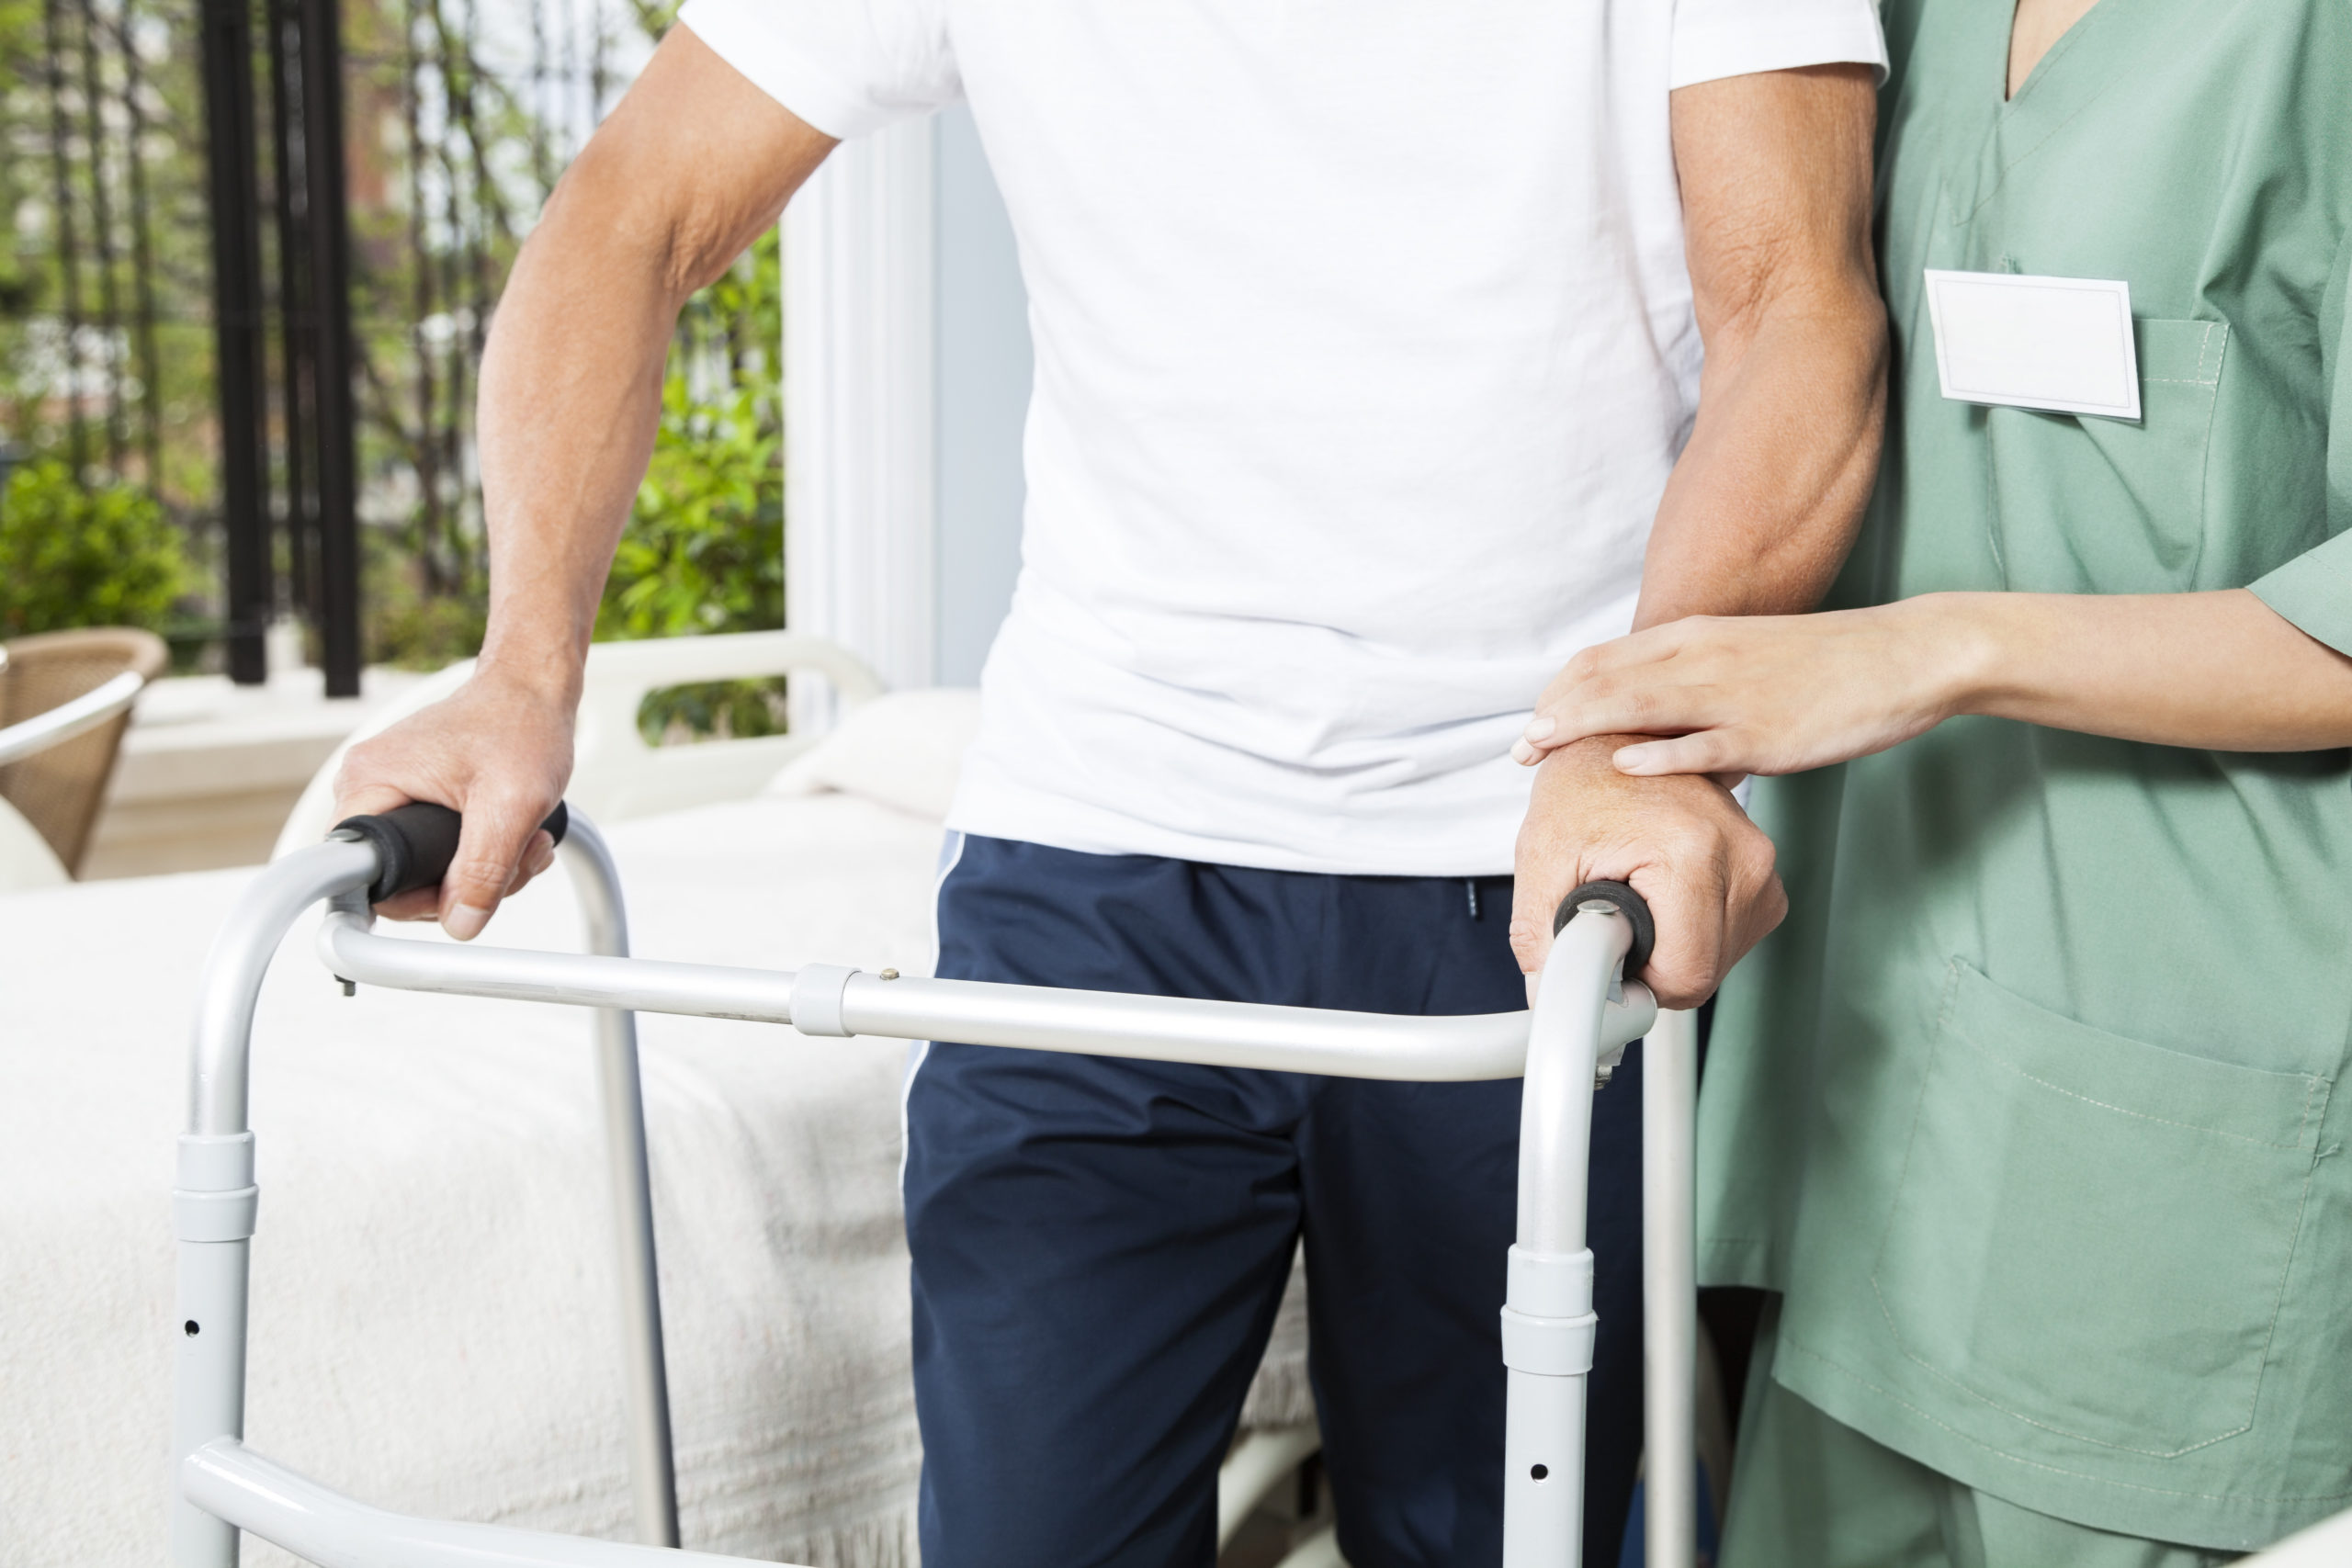 A Florida attorney can help you obtain financial compensation for accident injuries requiring costly long-term care.